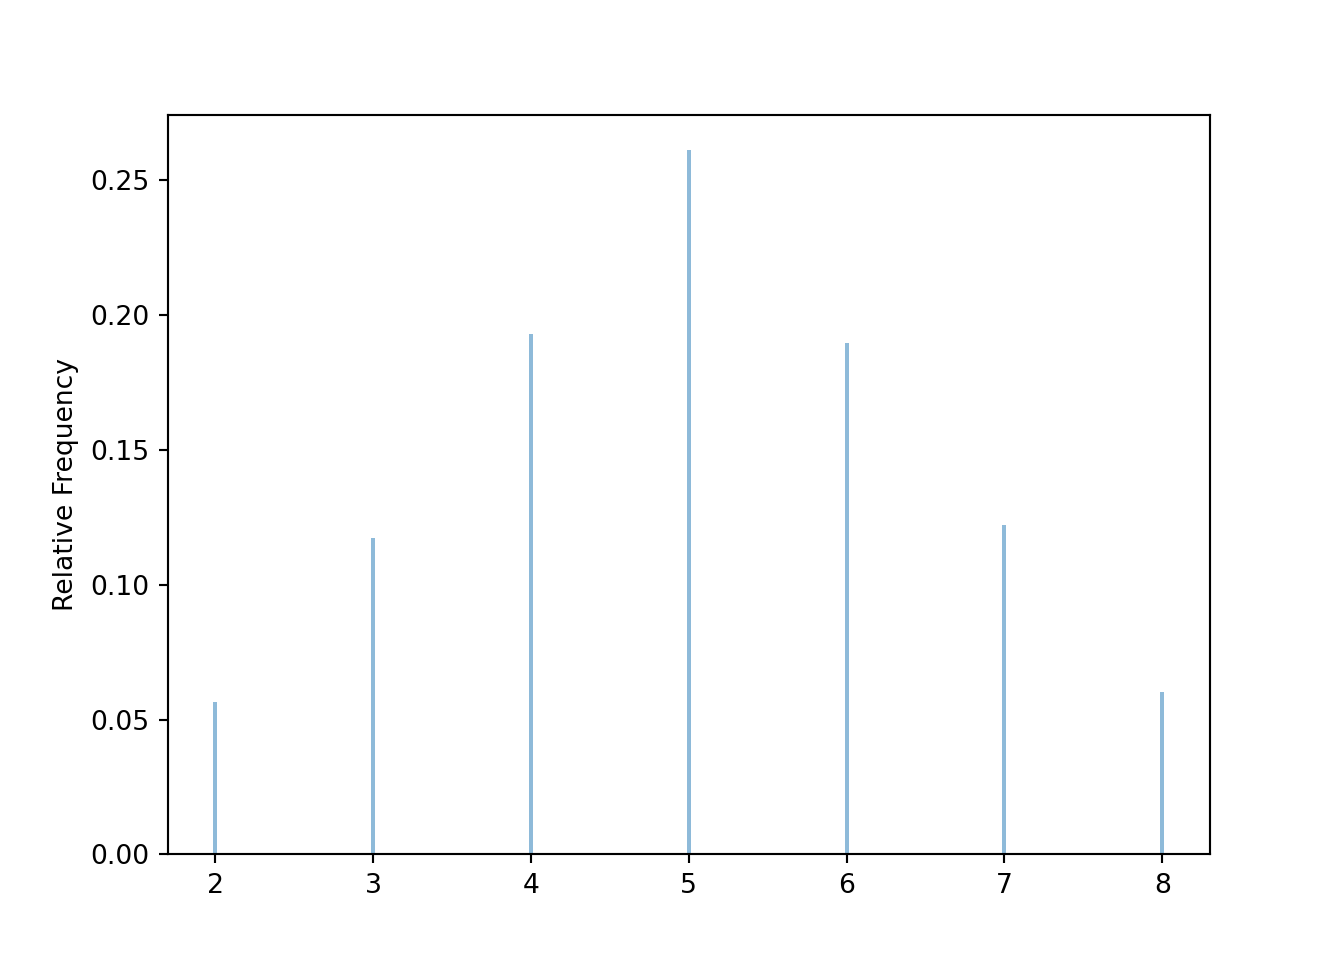 Simulation-based approximate distribution of \(X\), the sum of two rolls of a fair four-sided die.